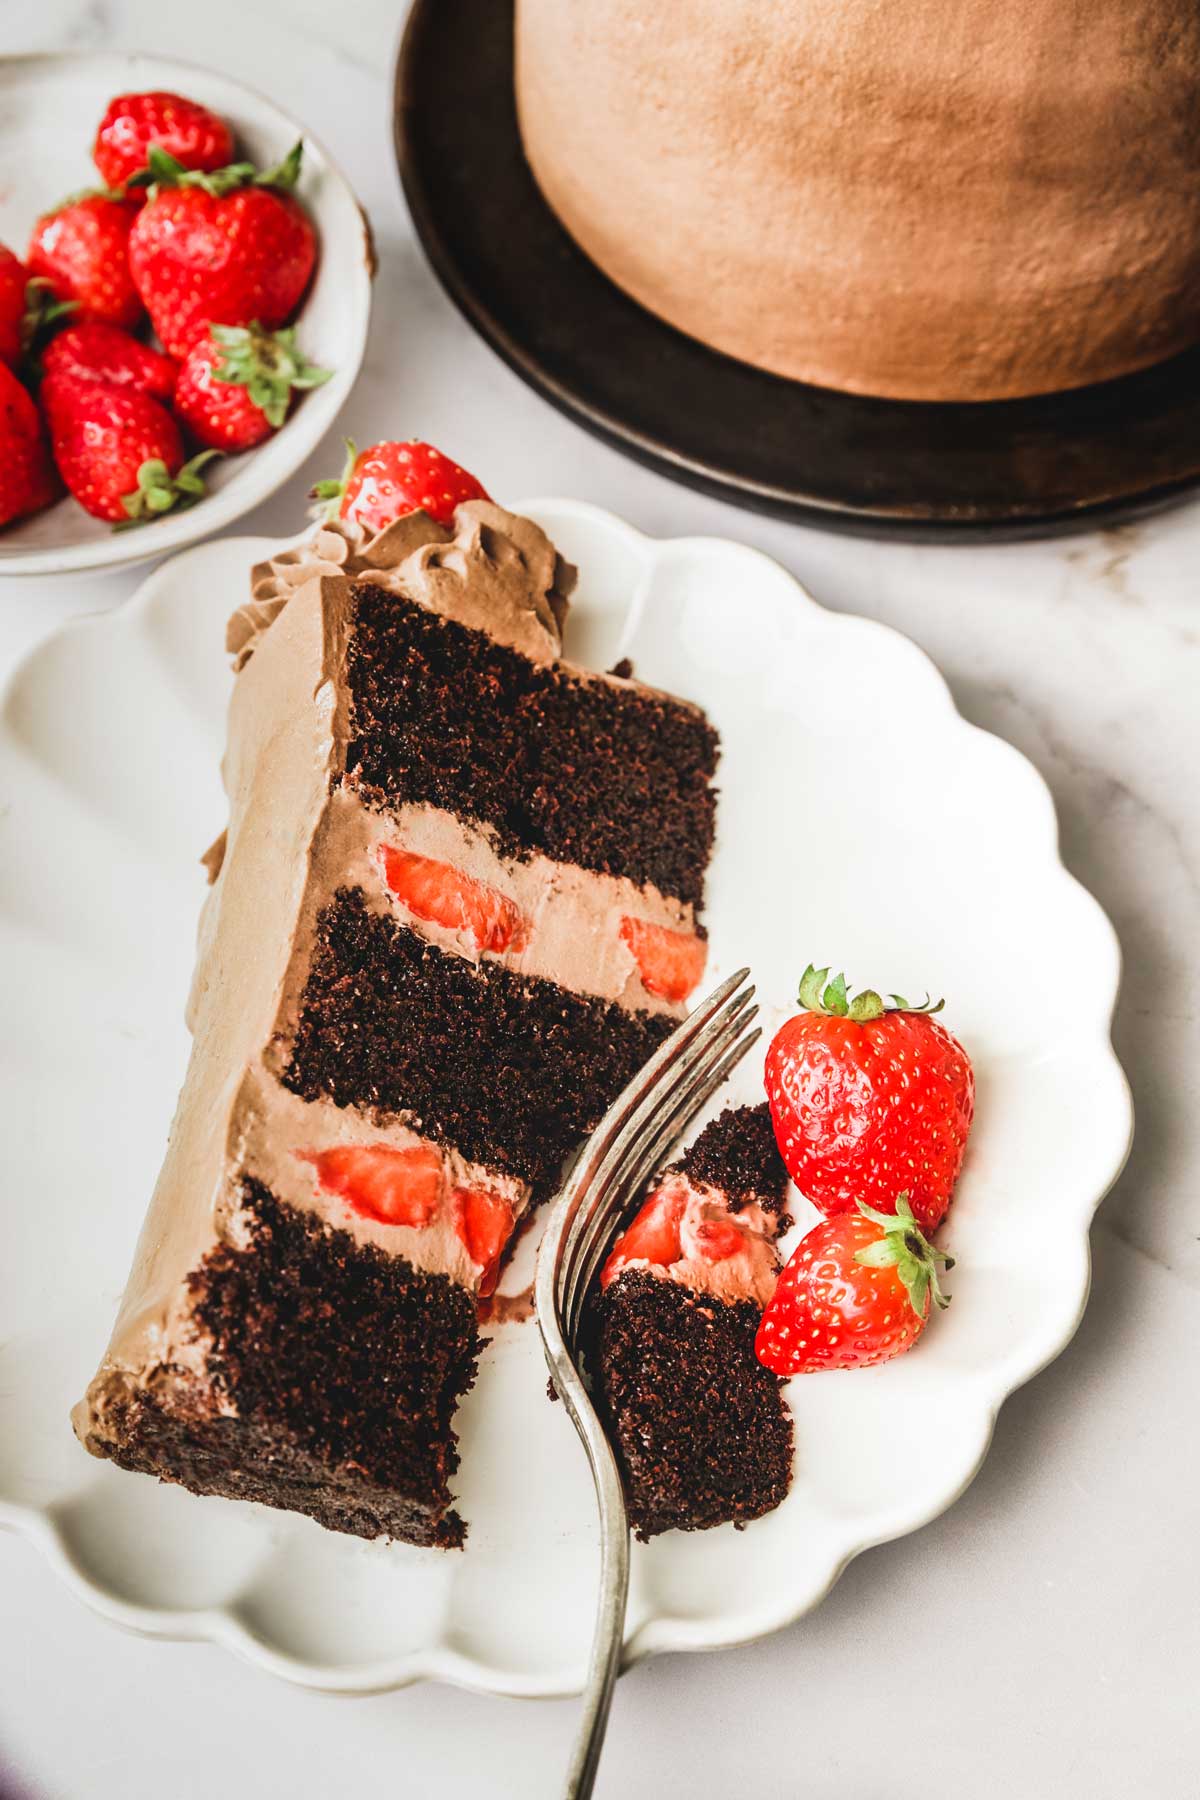 Slice of chocolate and strawberry cake on a plate and a strawberry